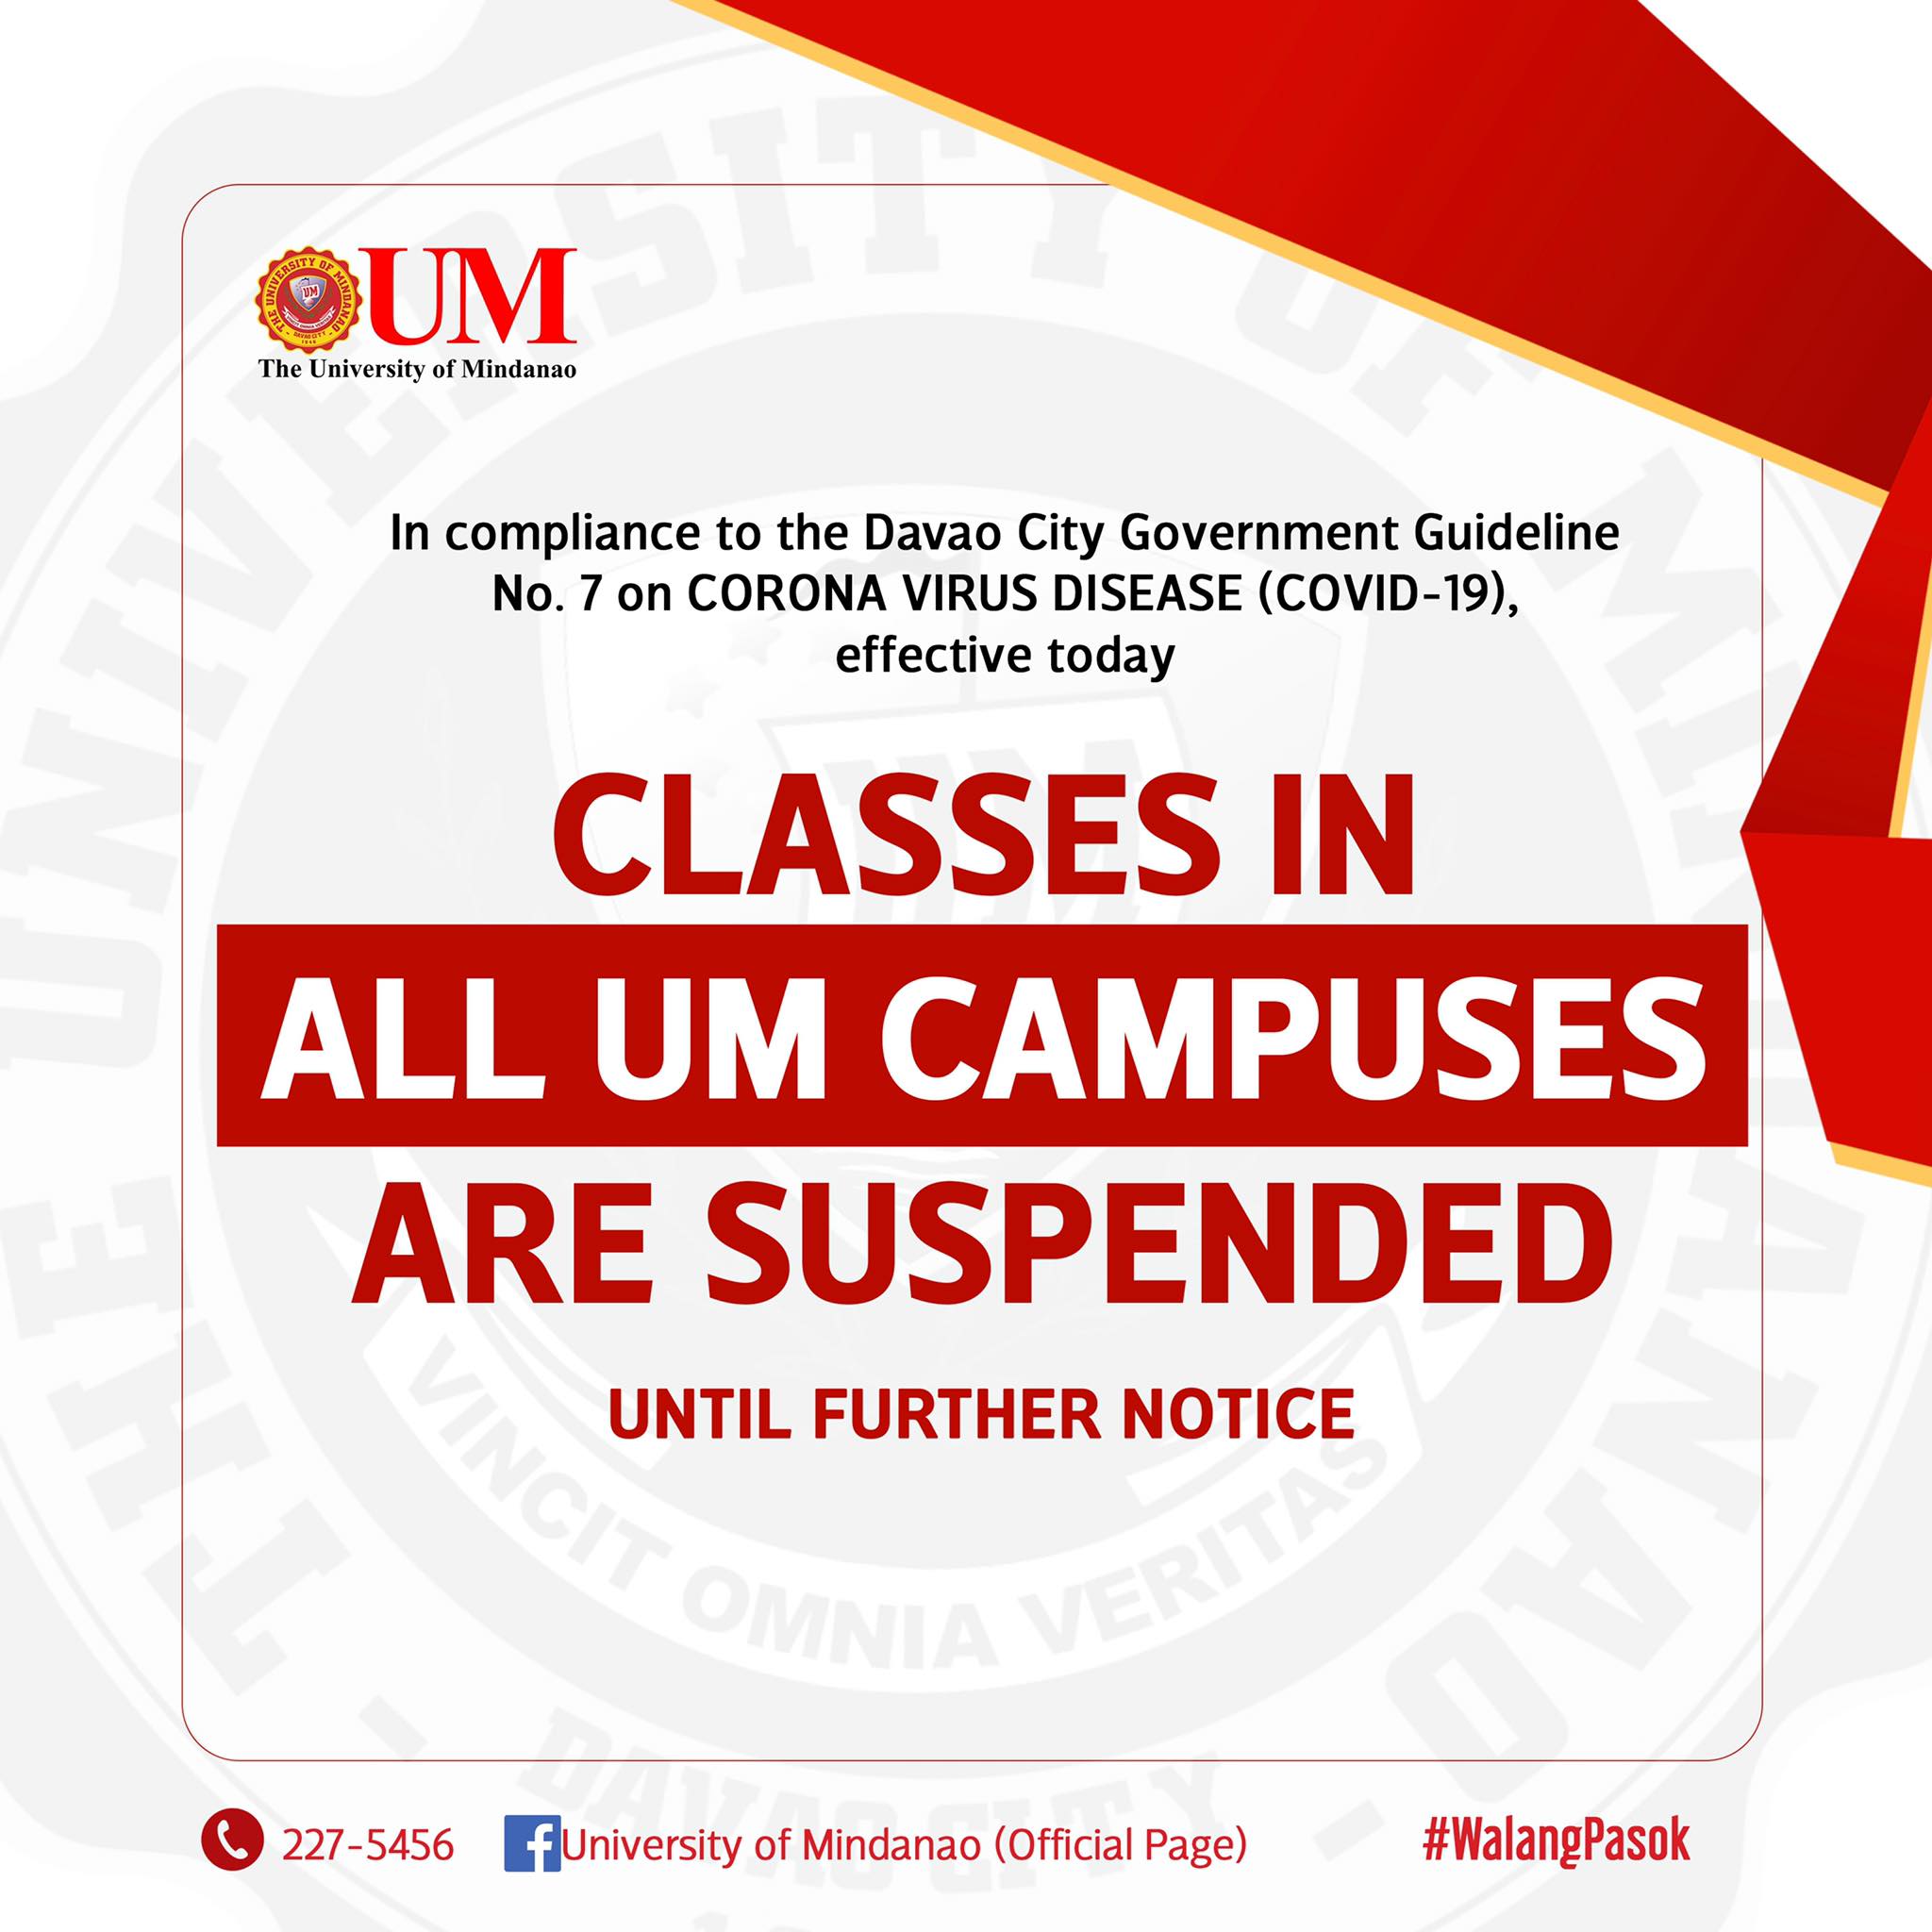 ANNOUNCEMENT: Suspension of classes in line with the Mandate of Davao city Government regarding COVID-19